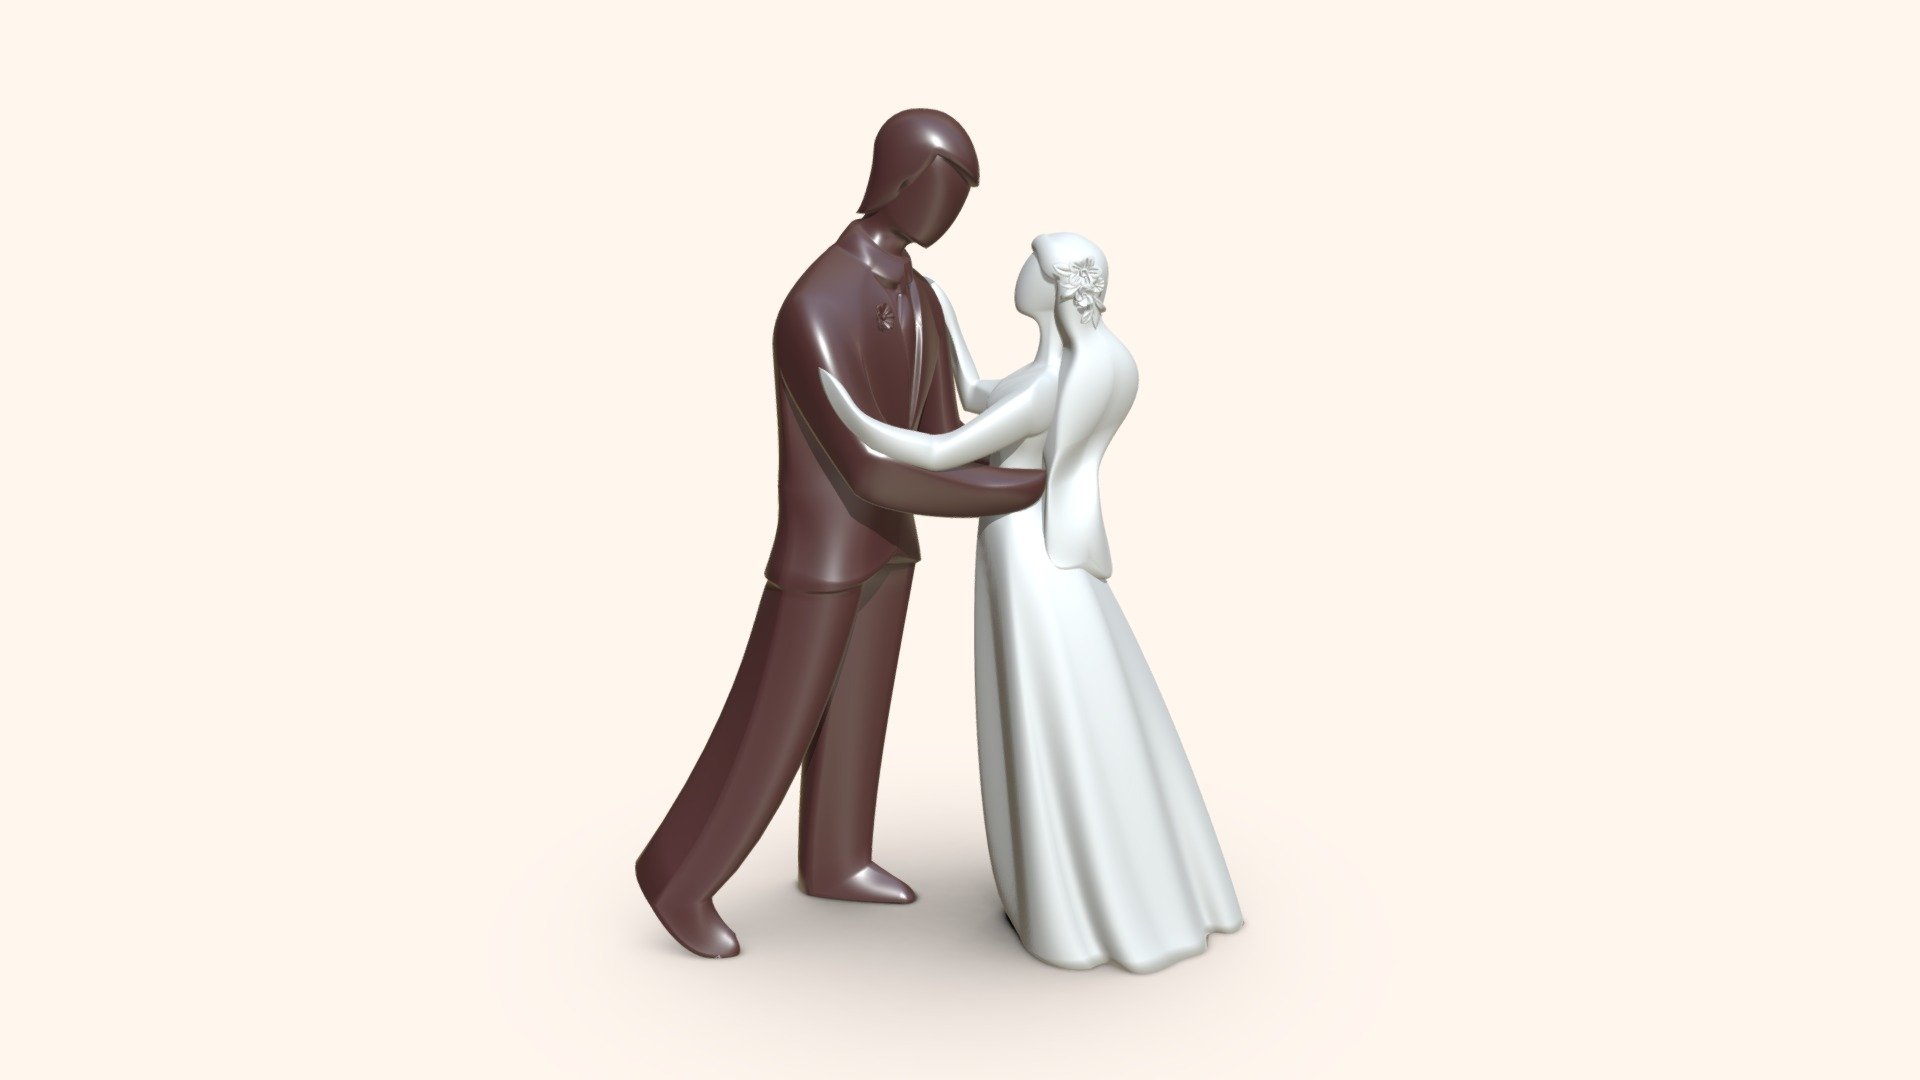 Happy couple of dolls for top of the wedding cake. Ready for confectionery 3d-print. Author`s work. Size: 98 x 42 x 130 mm. Volume: 95 cm3 3d model